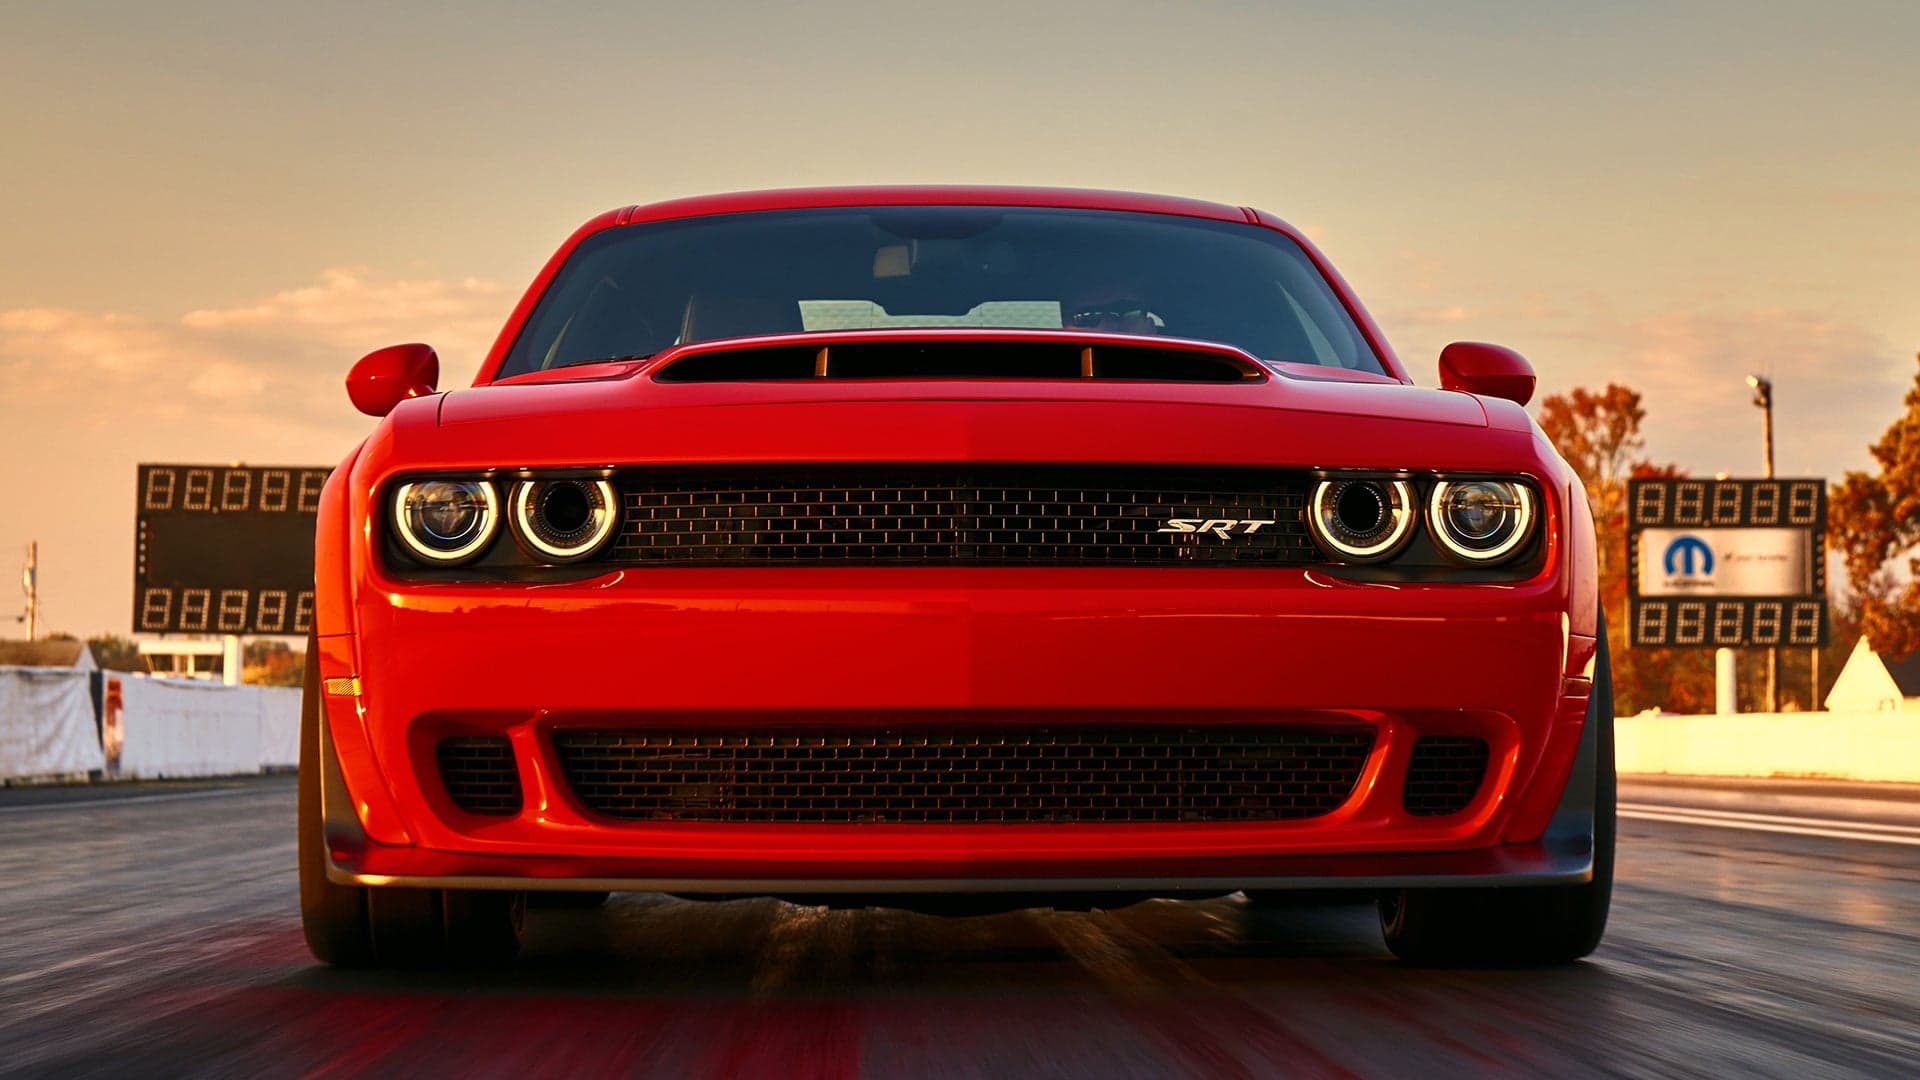 Dodge Challenger Demon’s Drag Radial Tires Are Too Wide for the Production Line